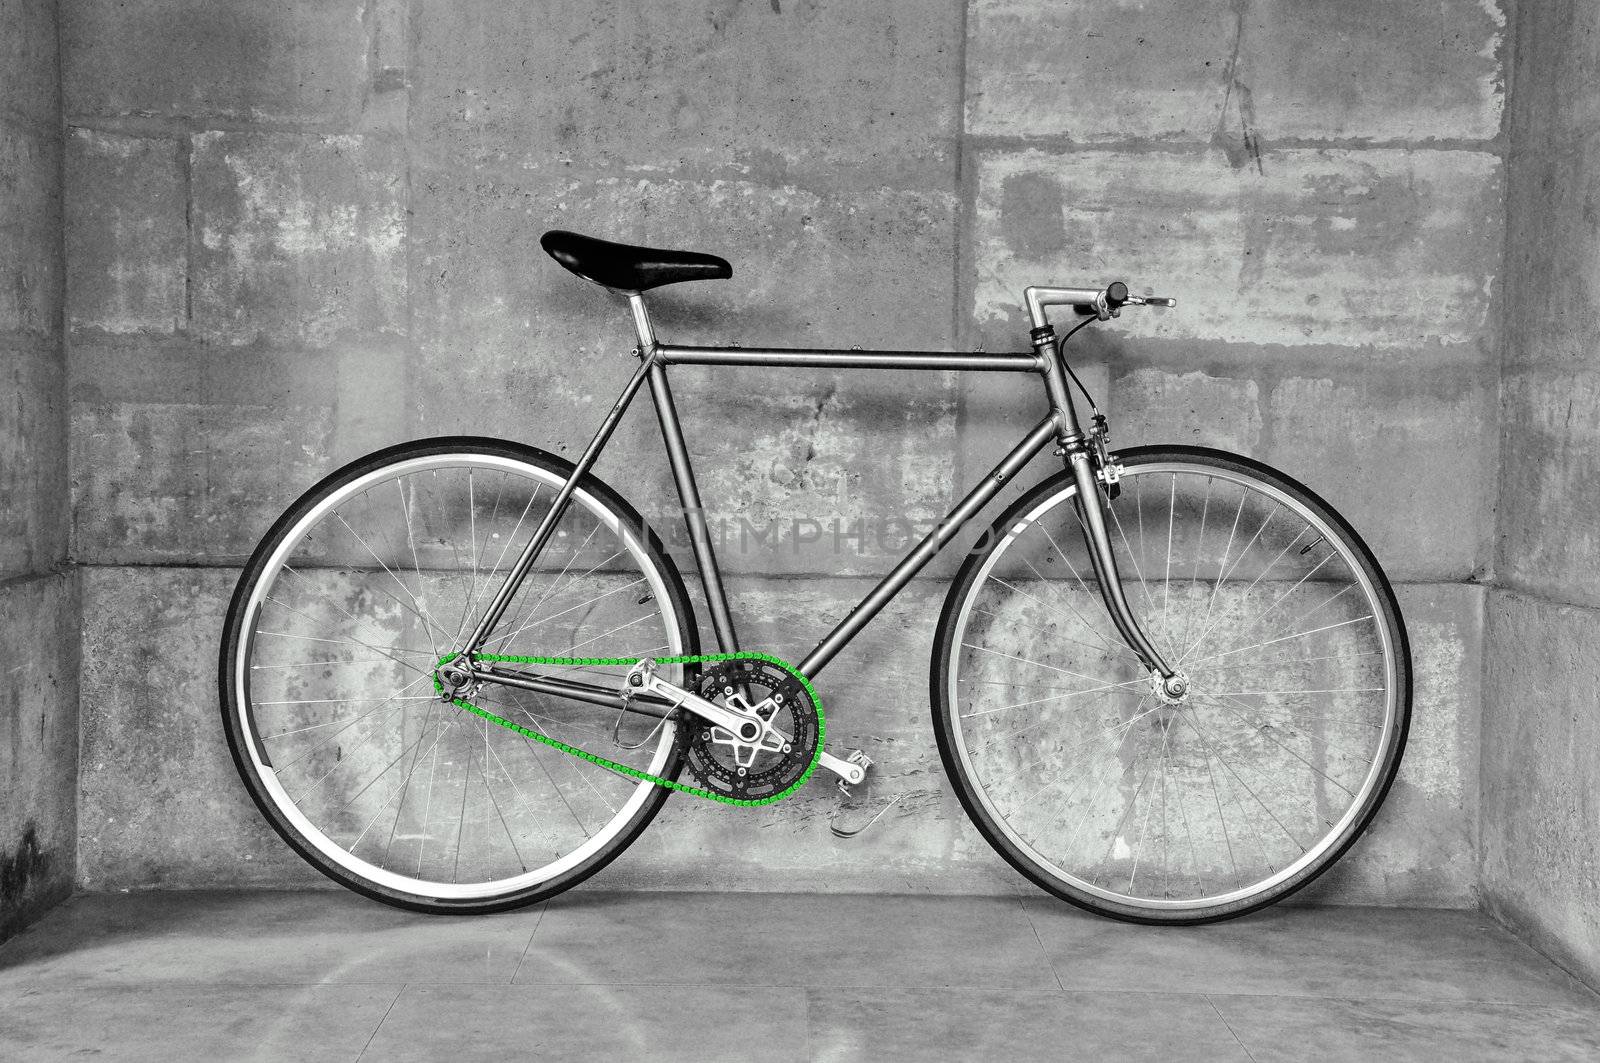 Fixed gear bicycle by dutourdumonde